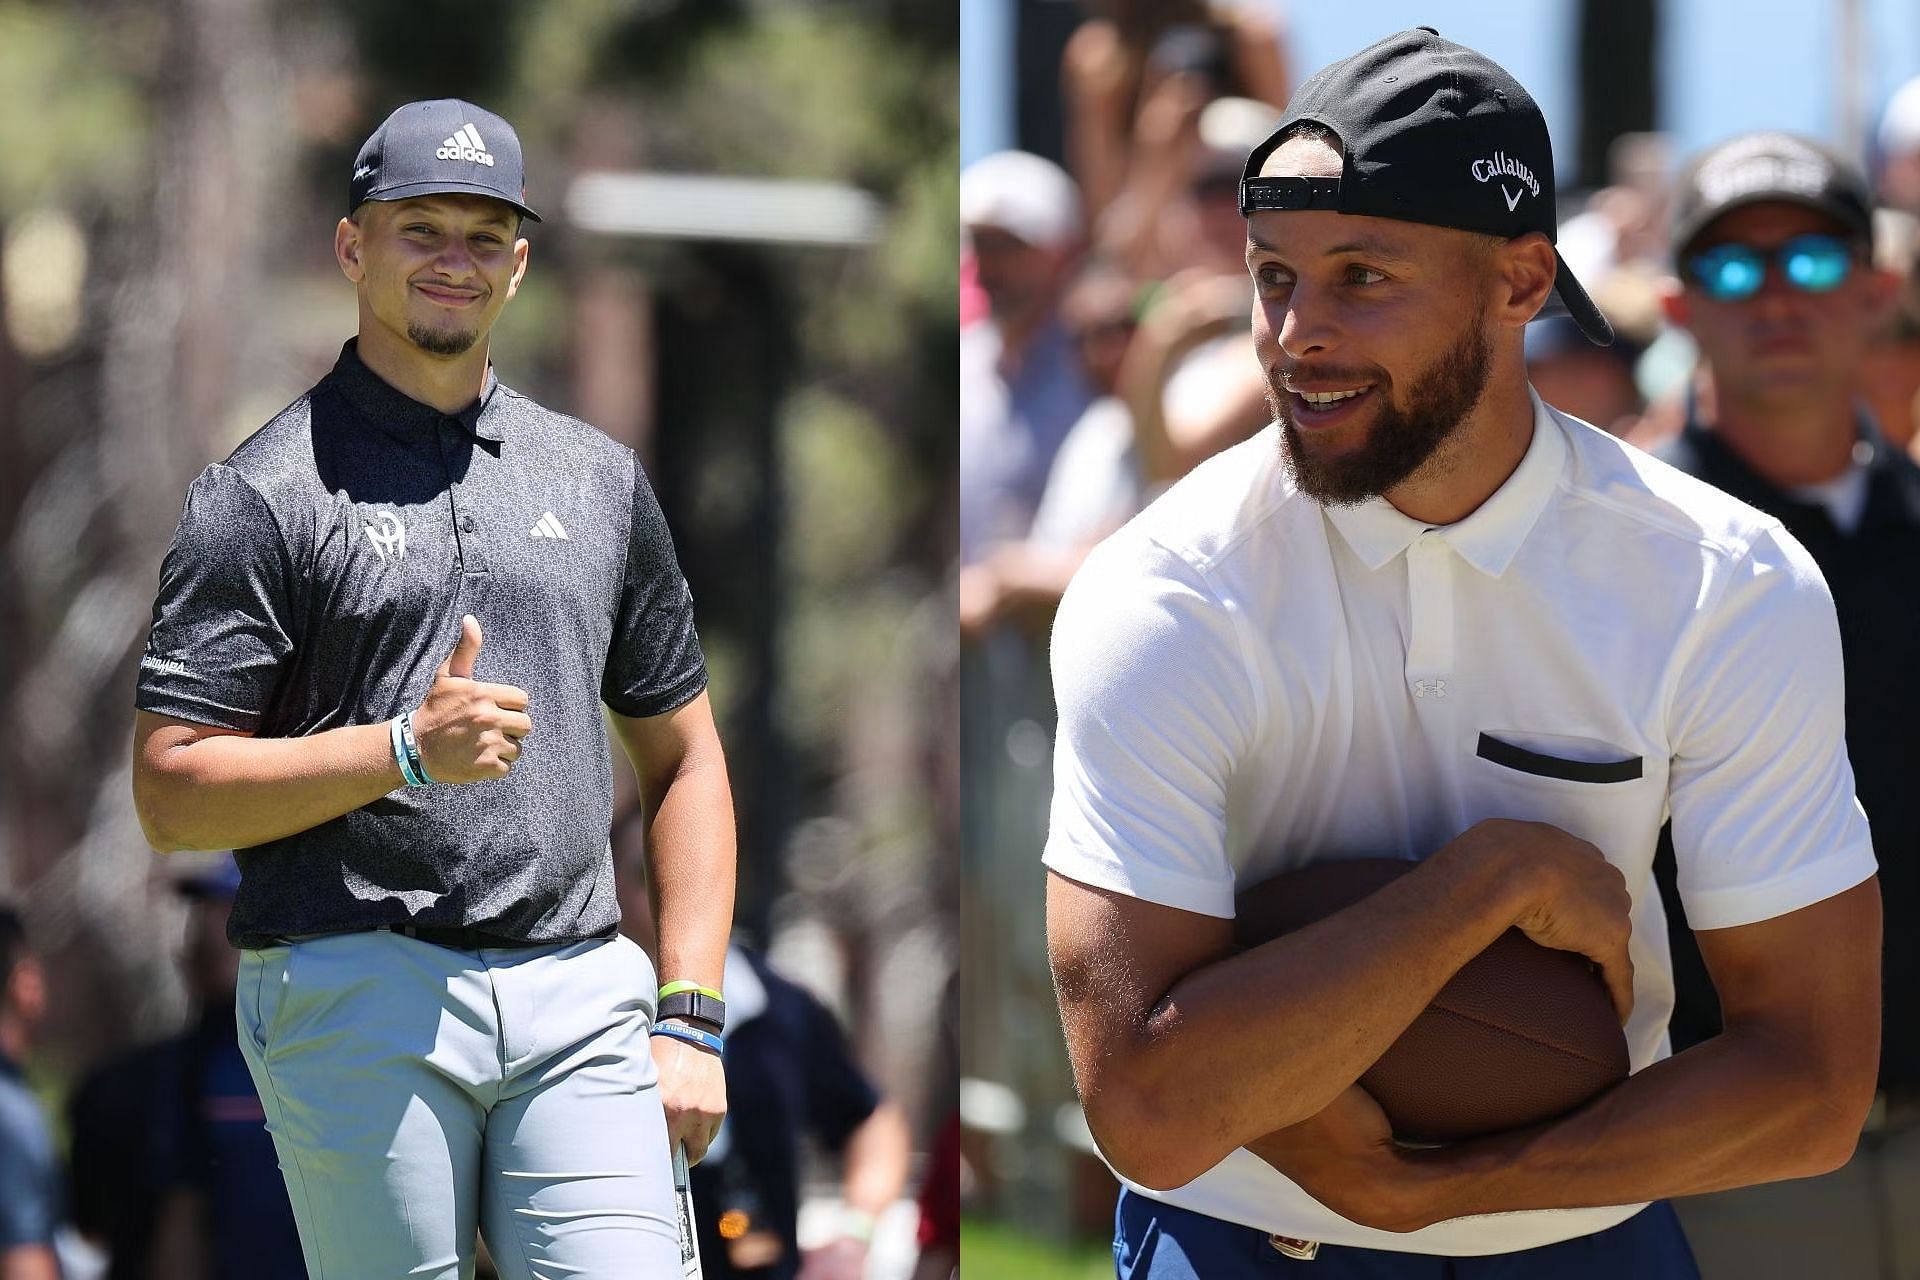 Even after signing $503 million deal, Patrick Mahomes craves to be as cool as $160,000,000 worth Steph Curry